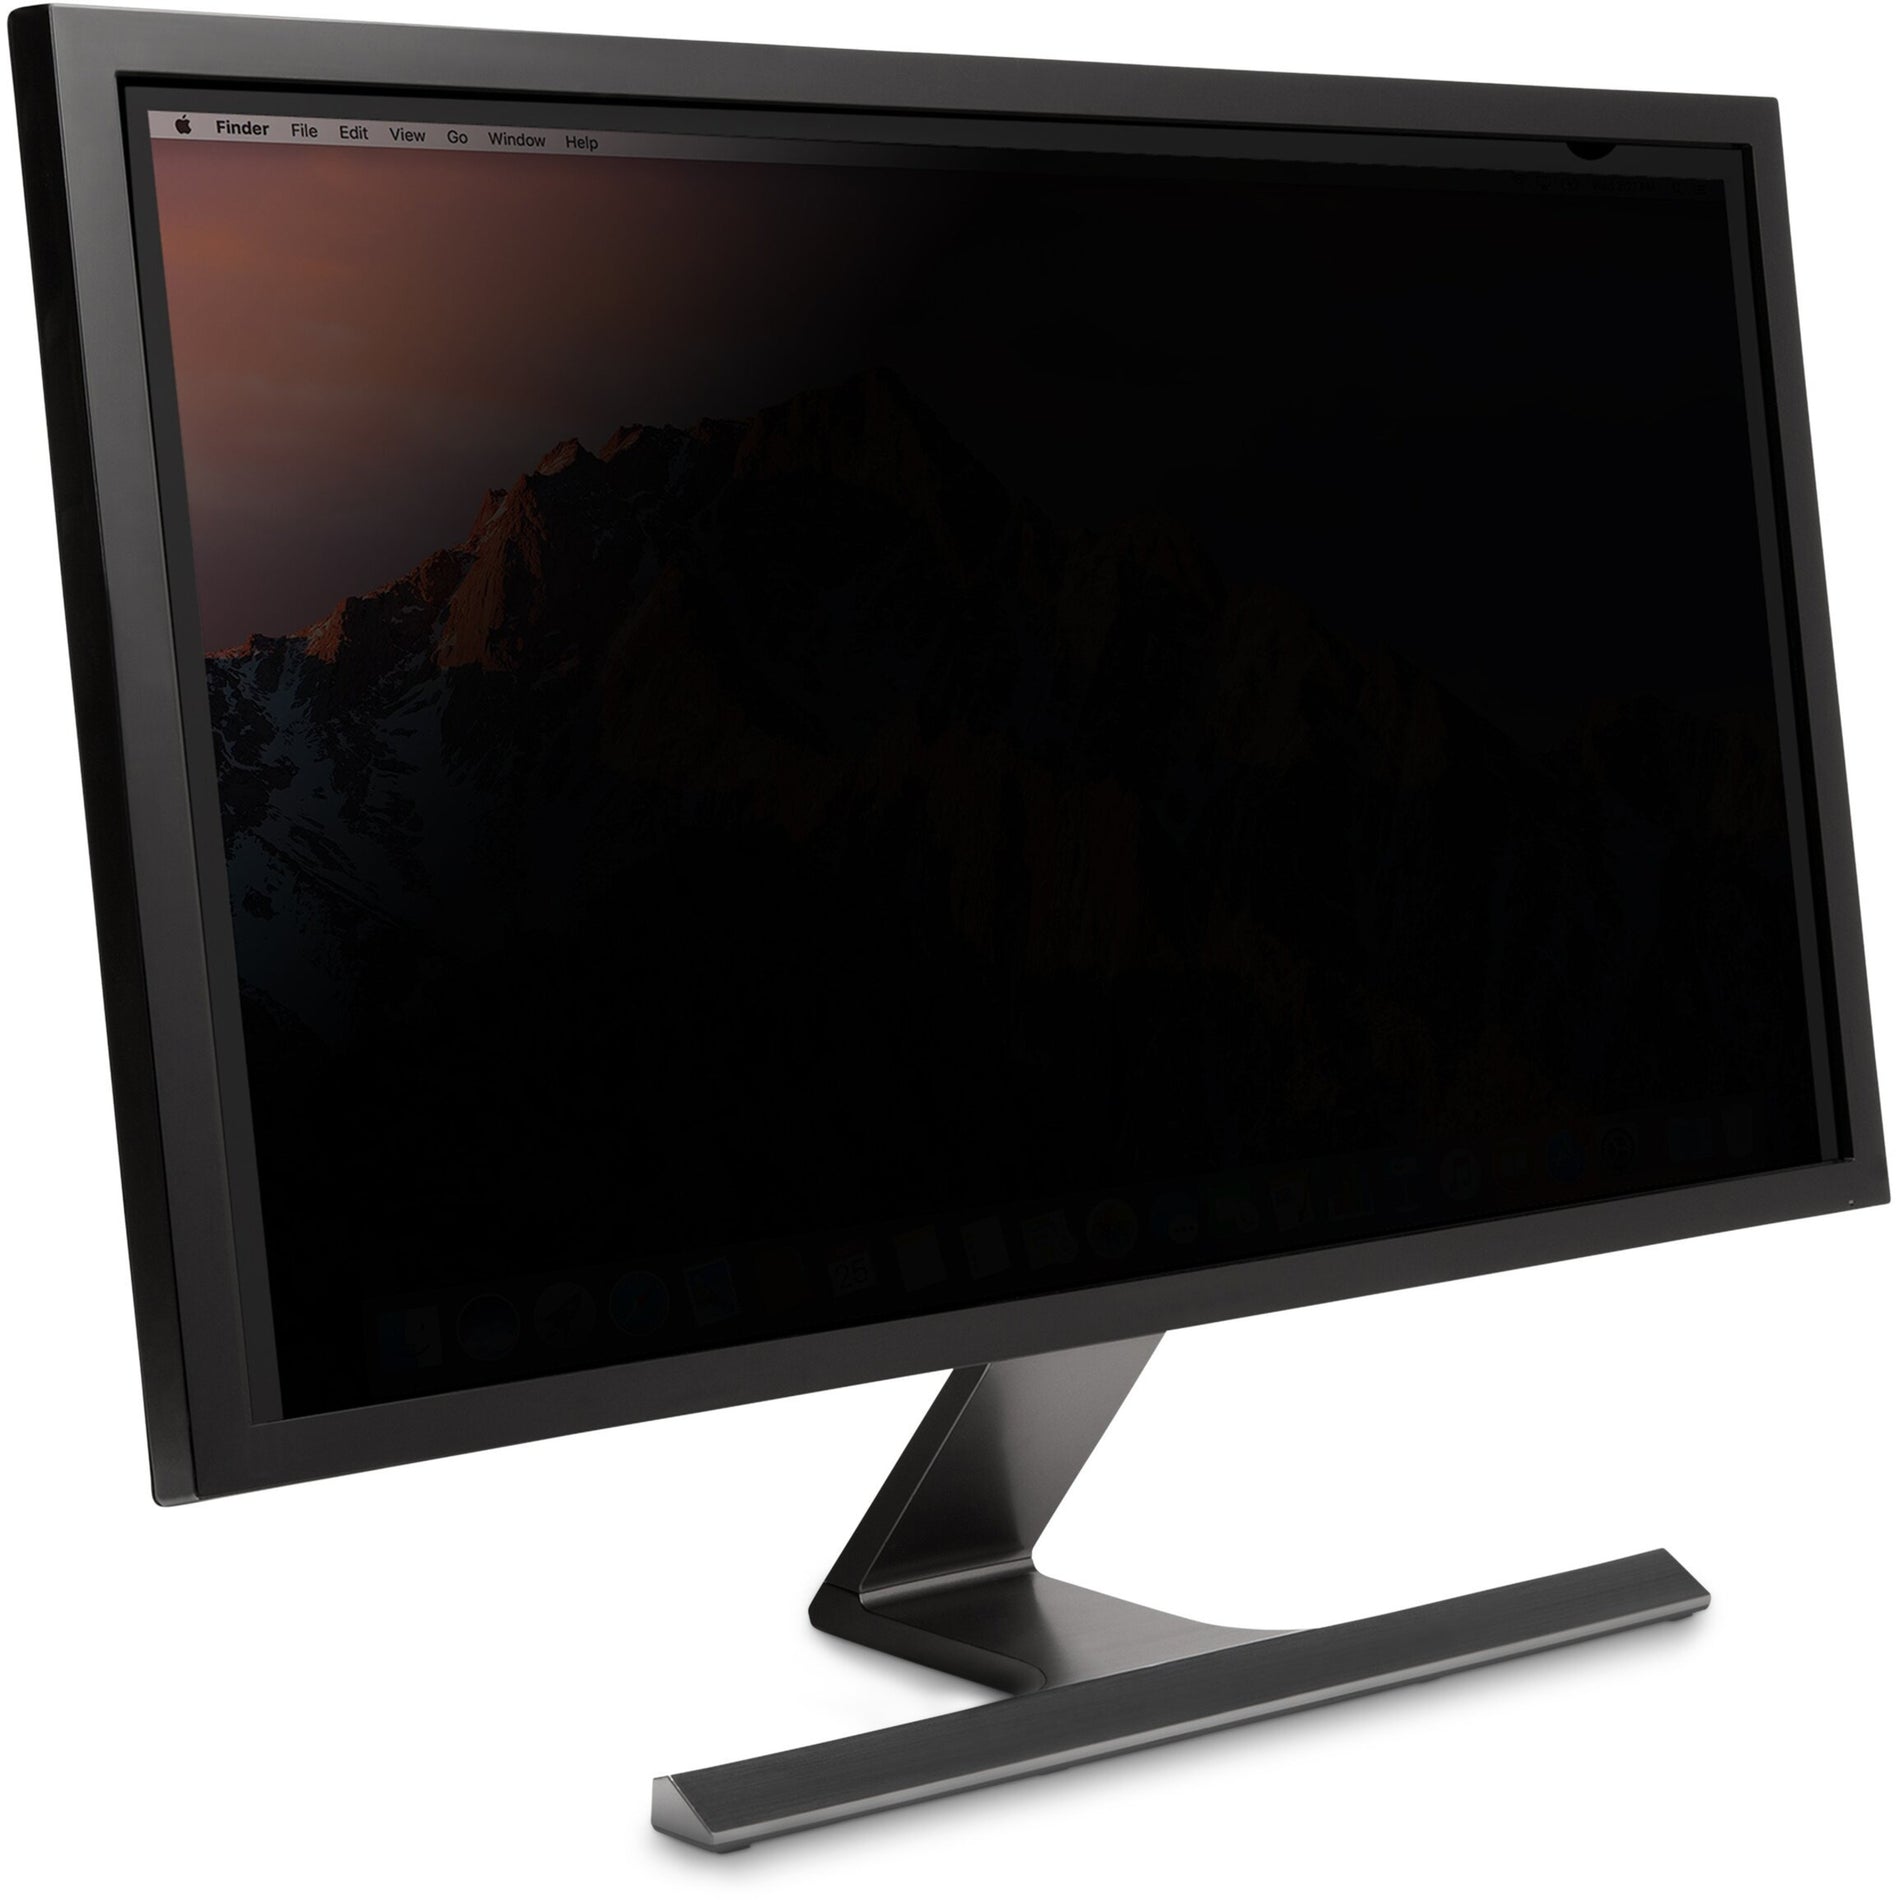 Kensington K52110WW FP195W9 Privacy Screen for Monitors (19.5" 16:9), Reversible Matte-to-Glossy, Anti-glare, Blue Light Reduction